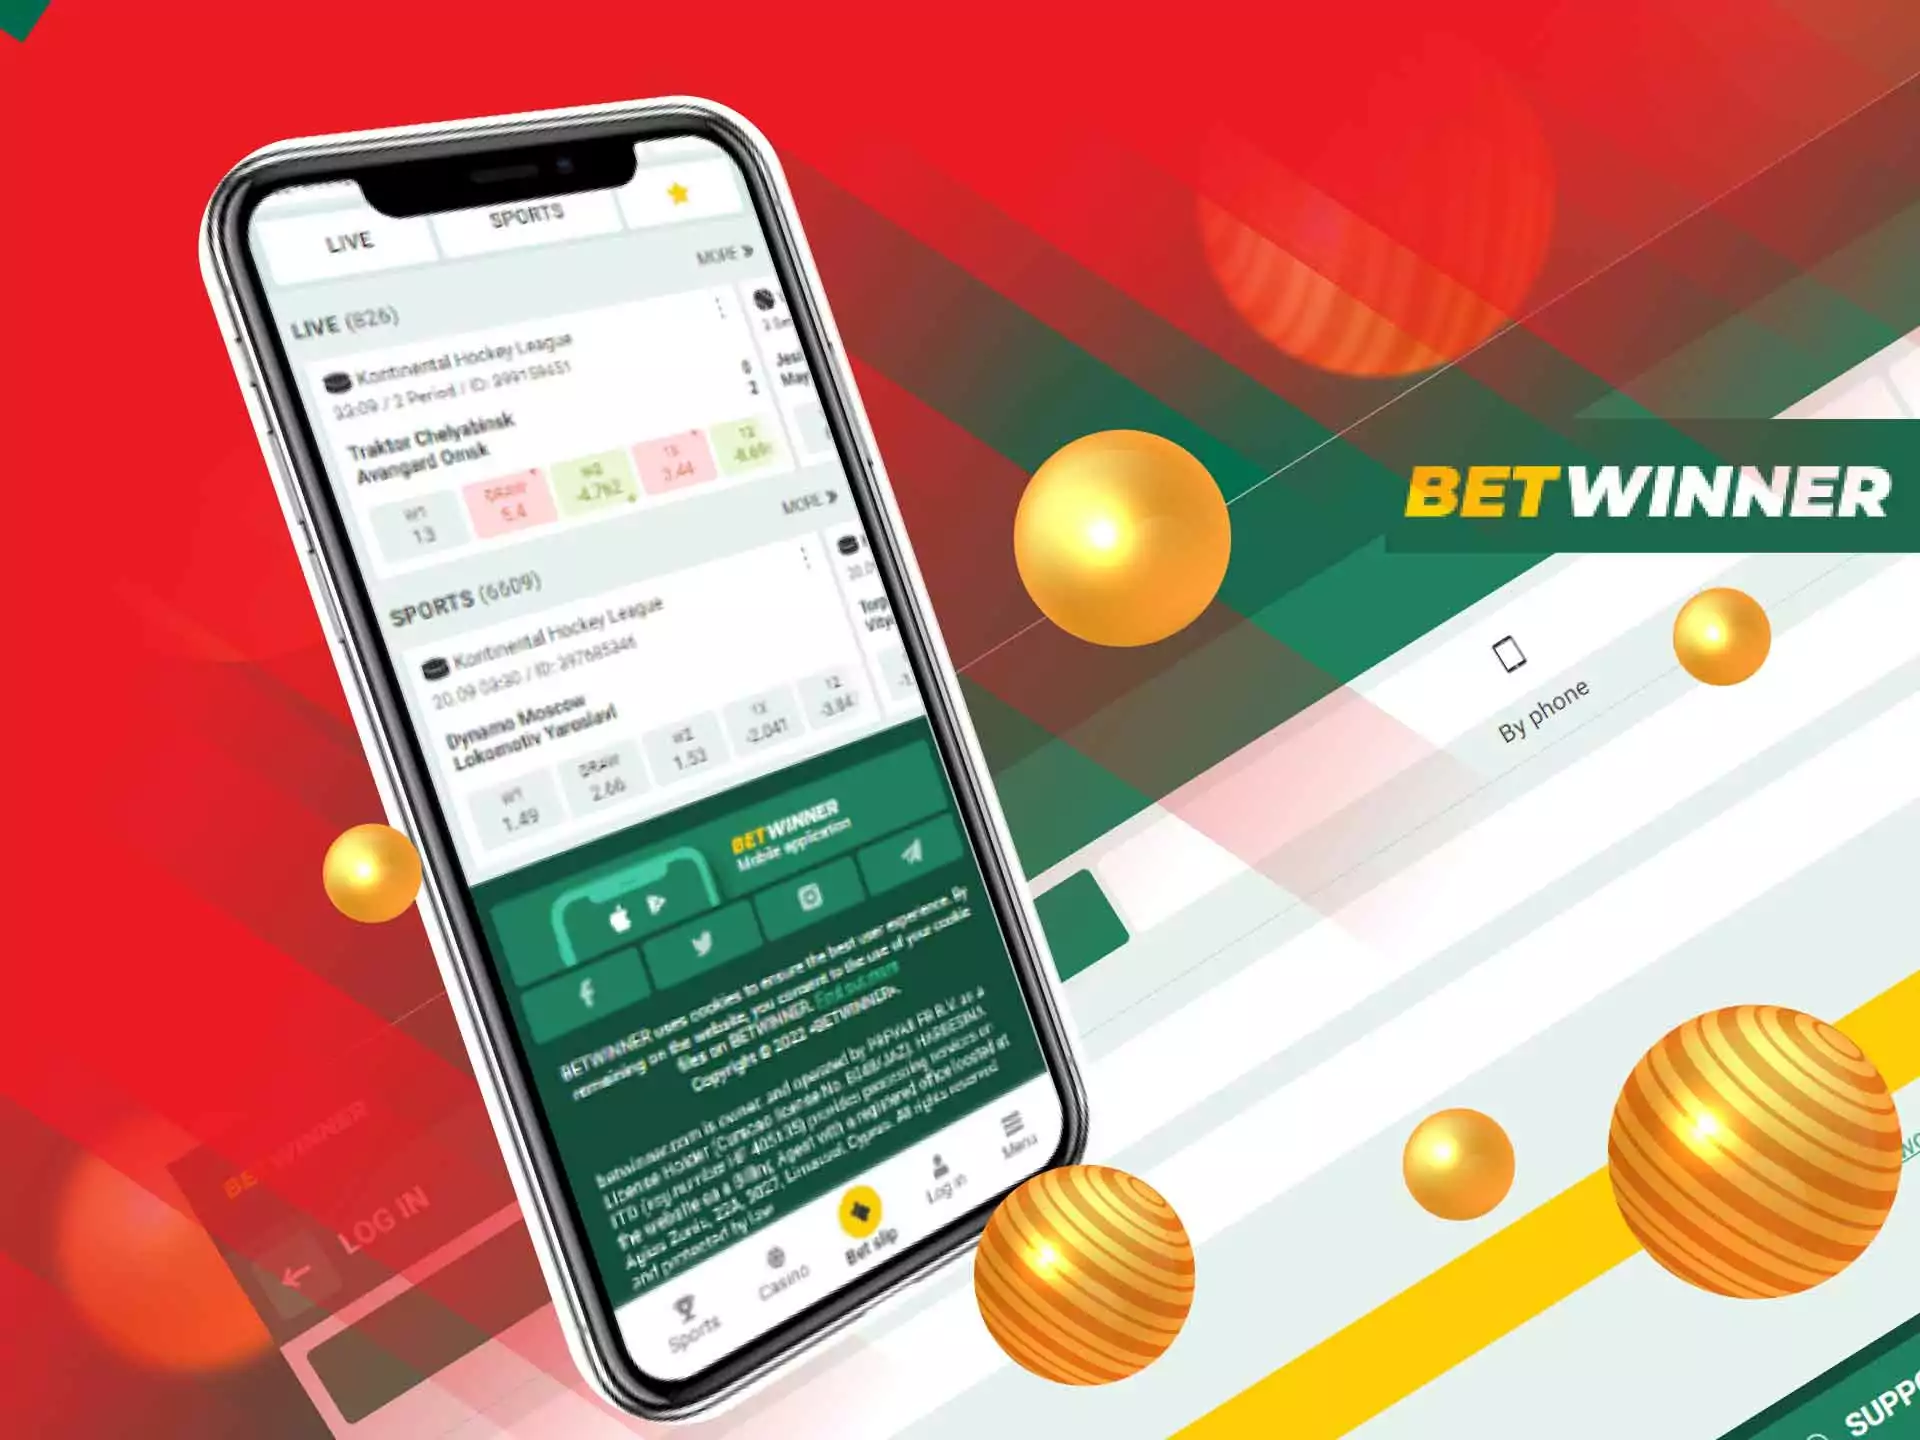 Sign up for Betwinner, choose the event and the outcome and place a bet on it.